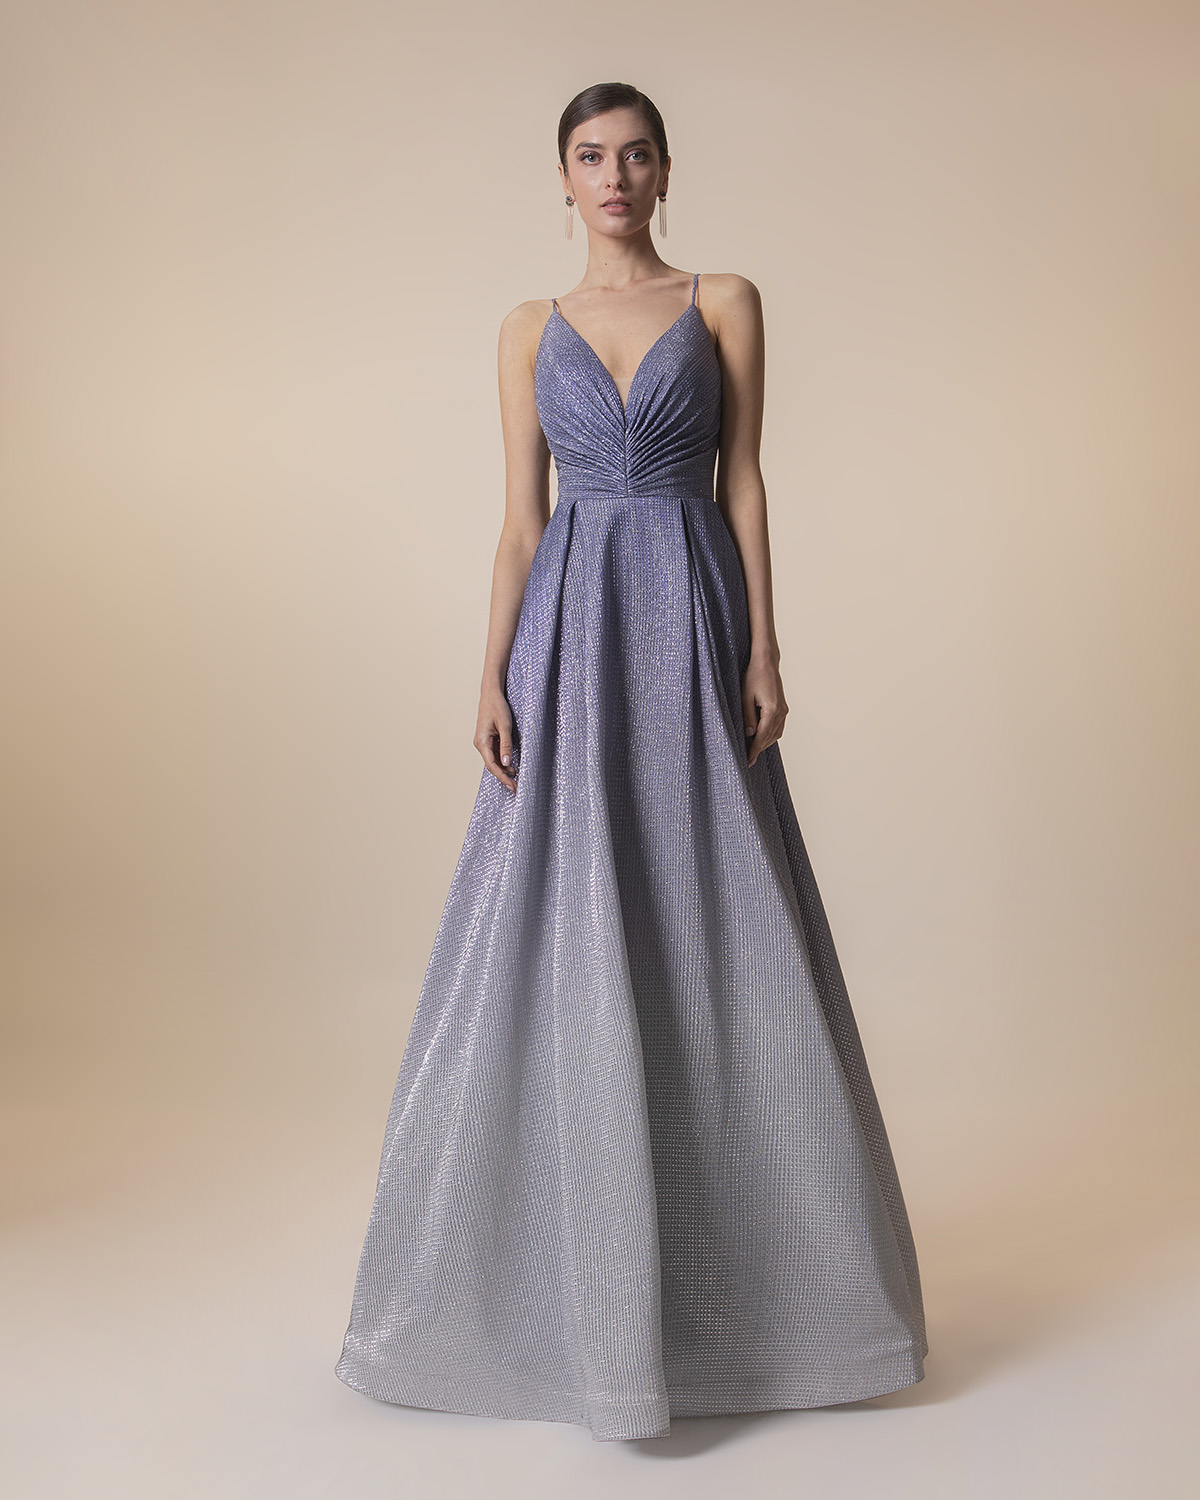 Long ombre evening dress with shining fabric